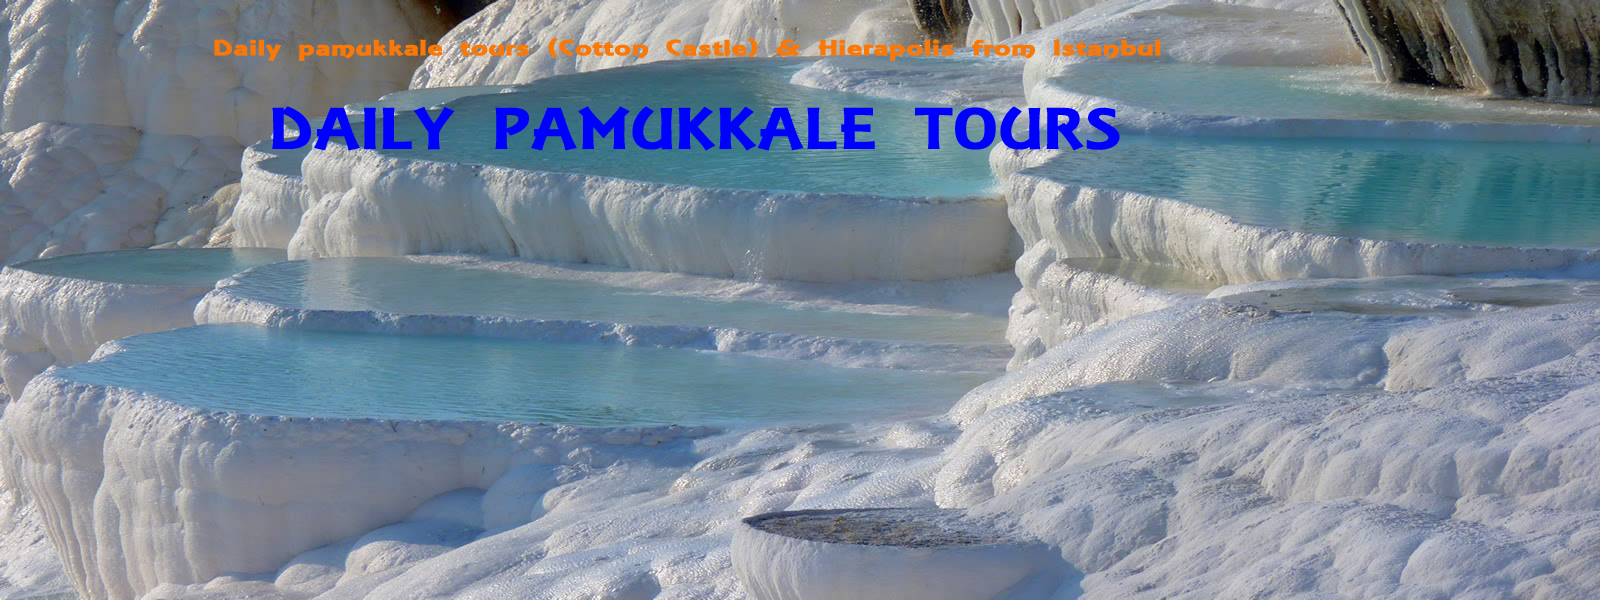  daily pamukkale tour from istanbul